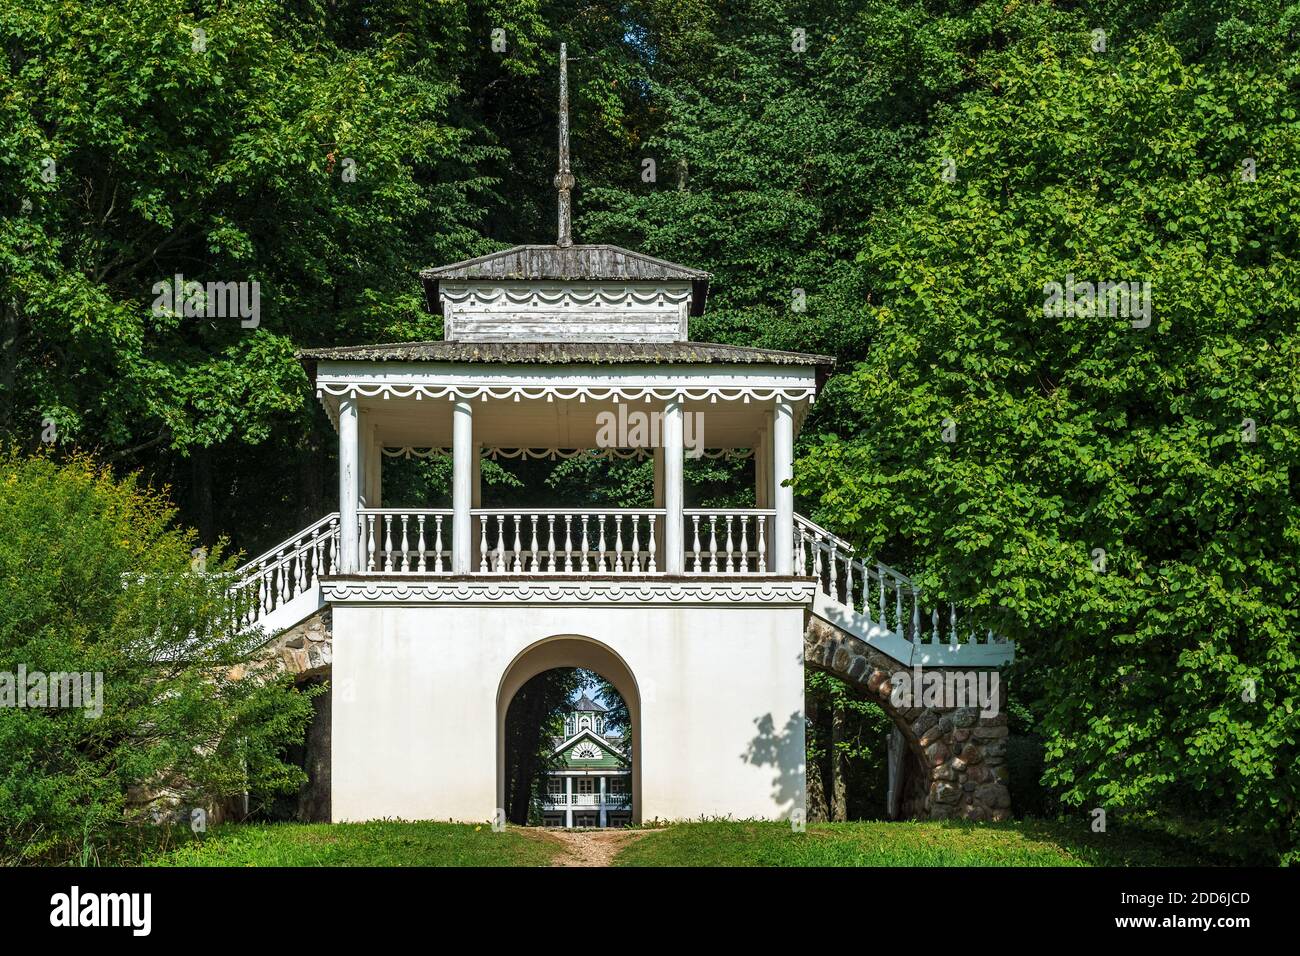 Pavilion Grotto, made in the form of a gazebo in the Petrovskoe estate in the Pushkin mountains. Stock Photo